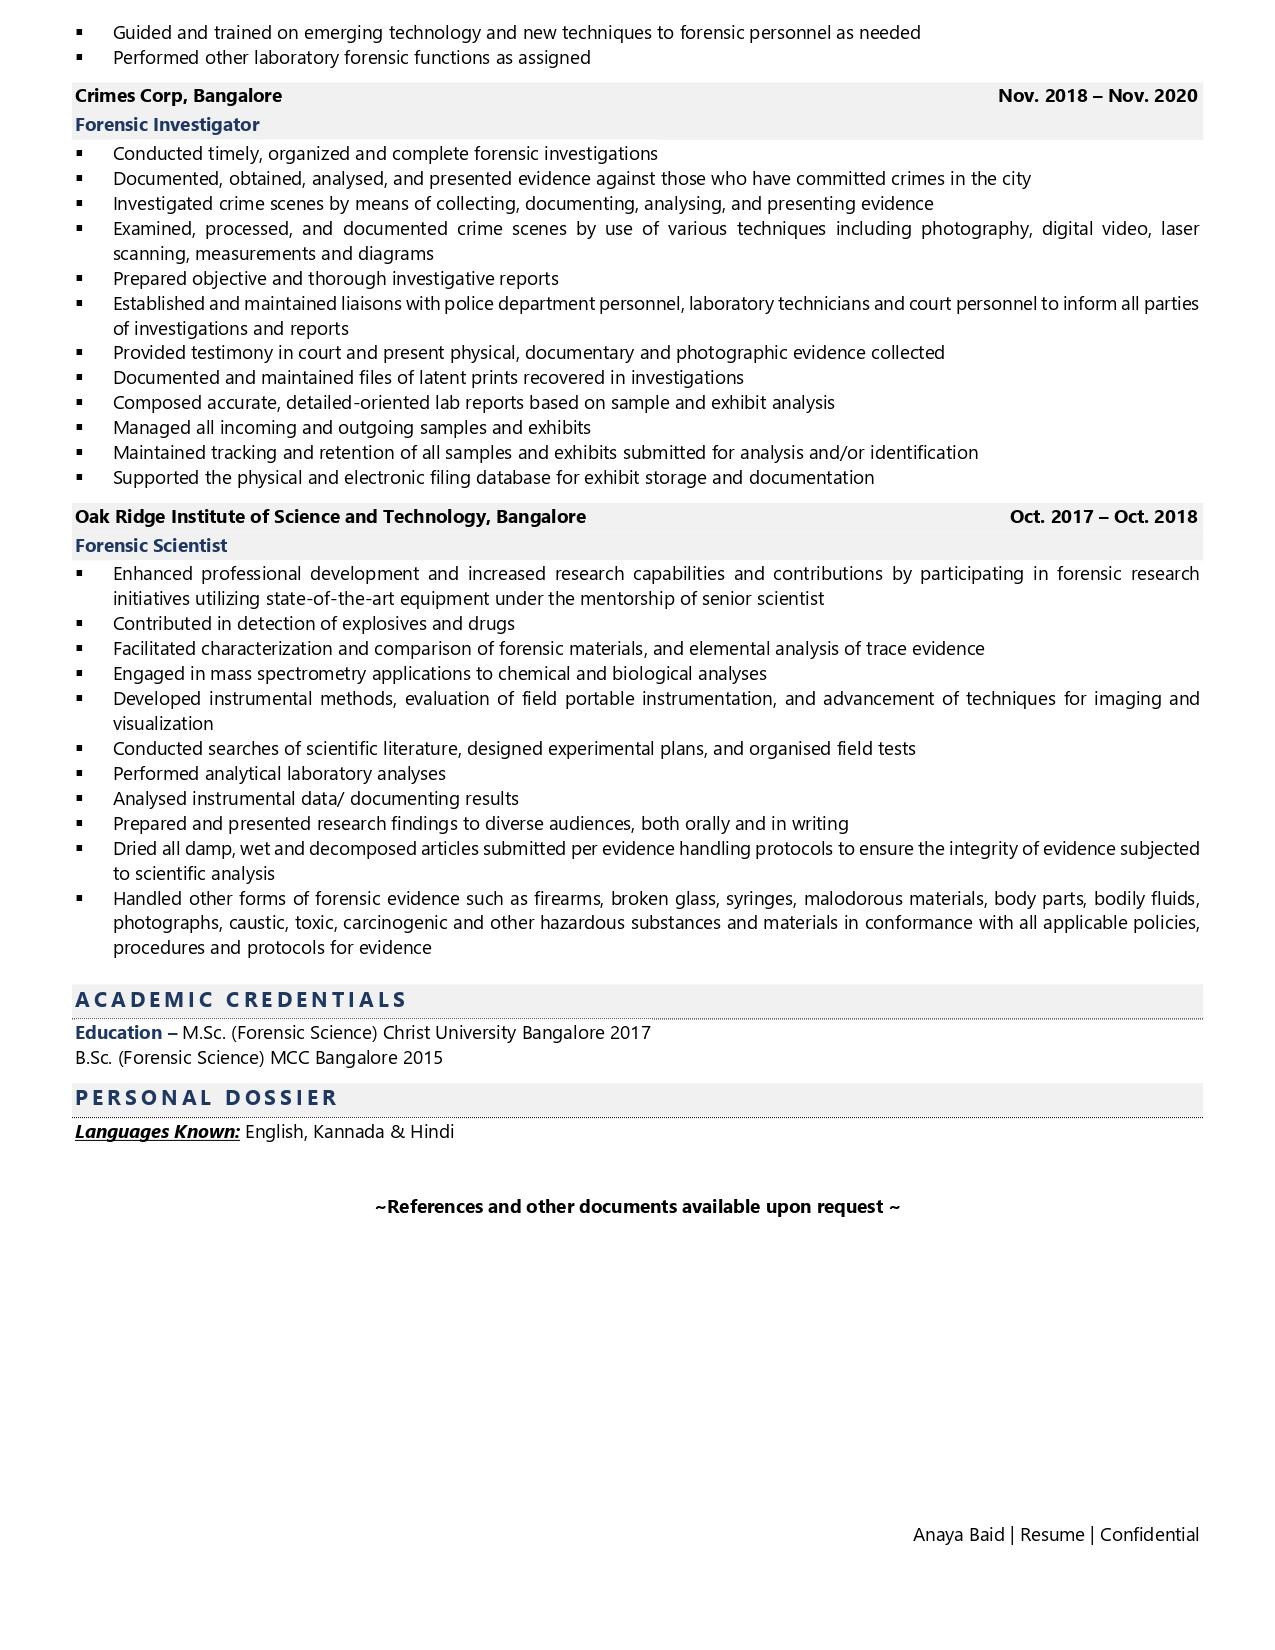 Forensic Science Technician - Resume Example & Template